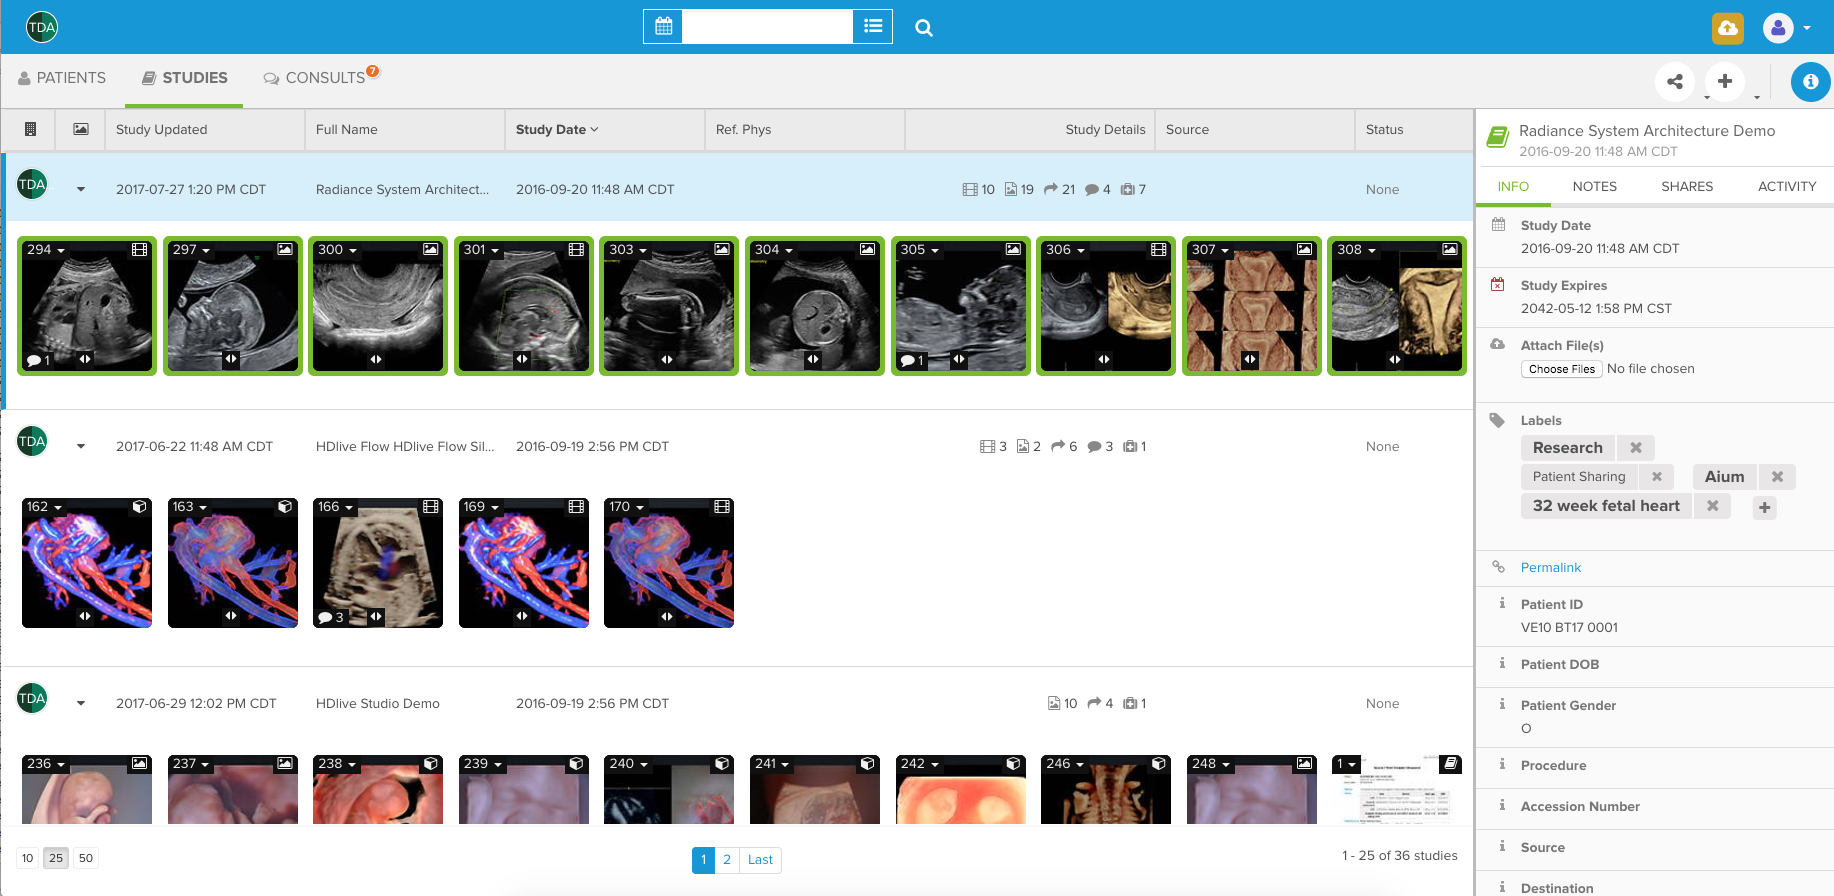 Cloud access and archival of images, clips and reports